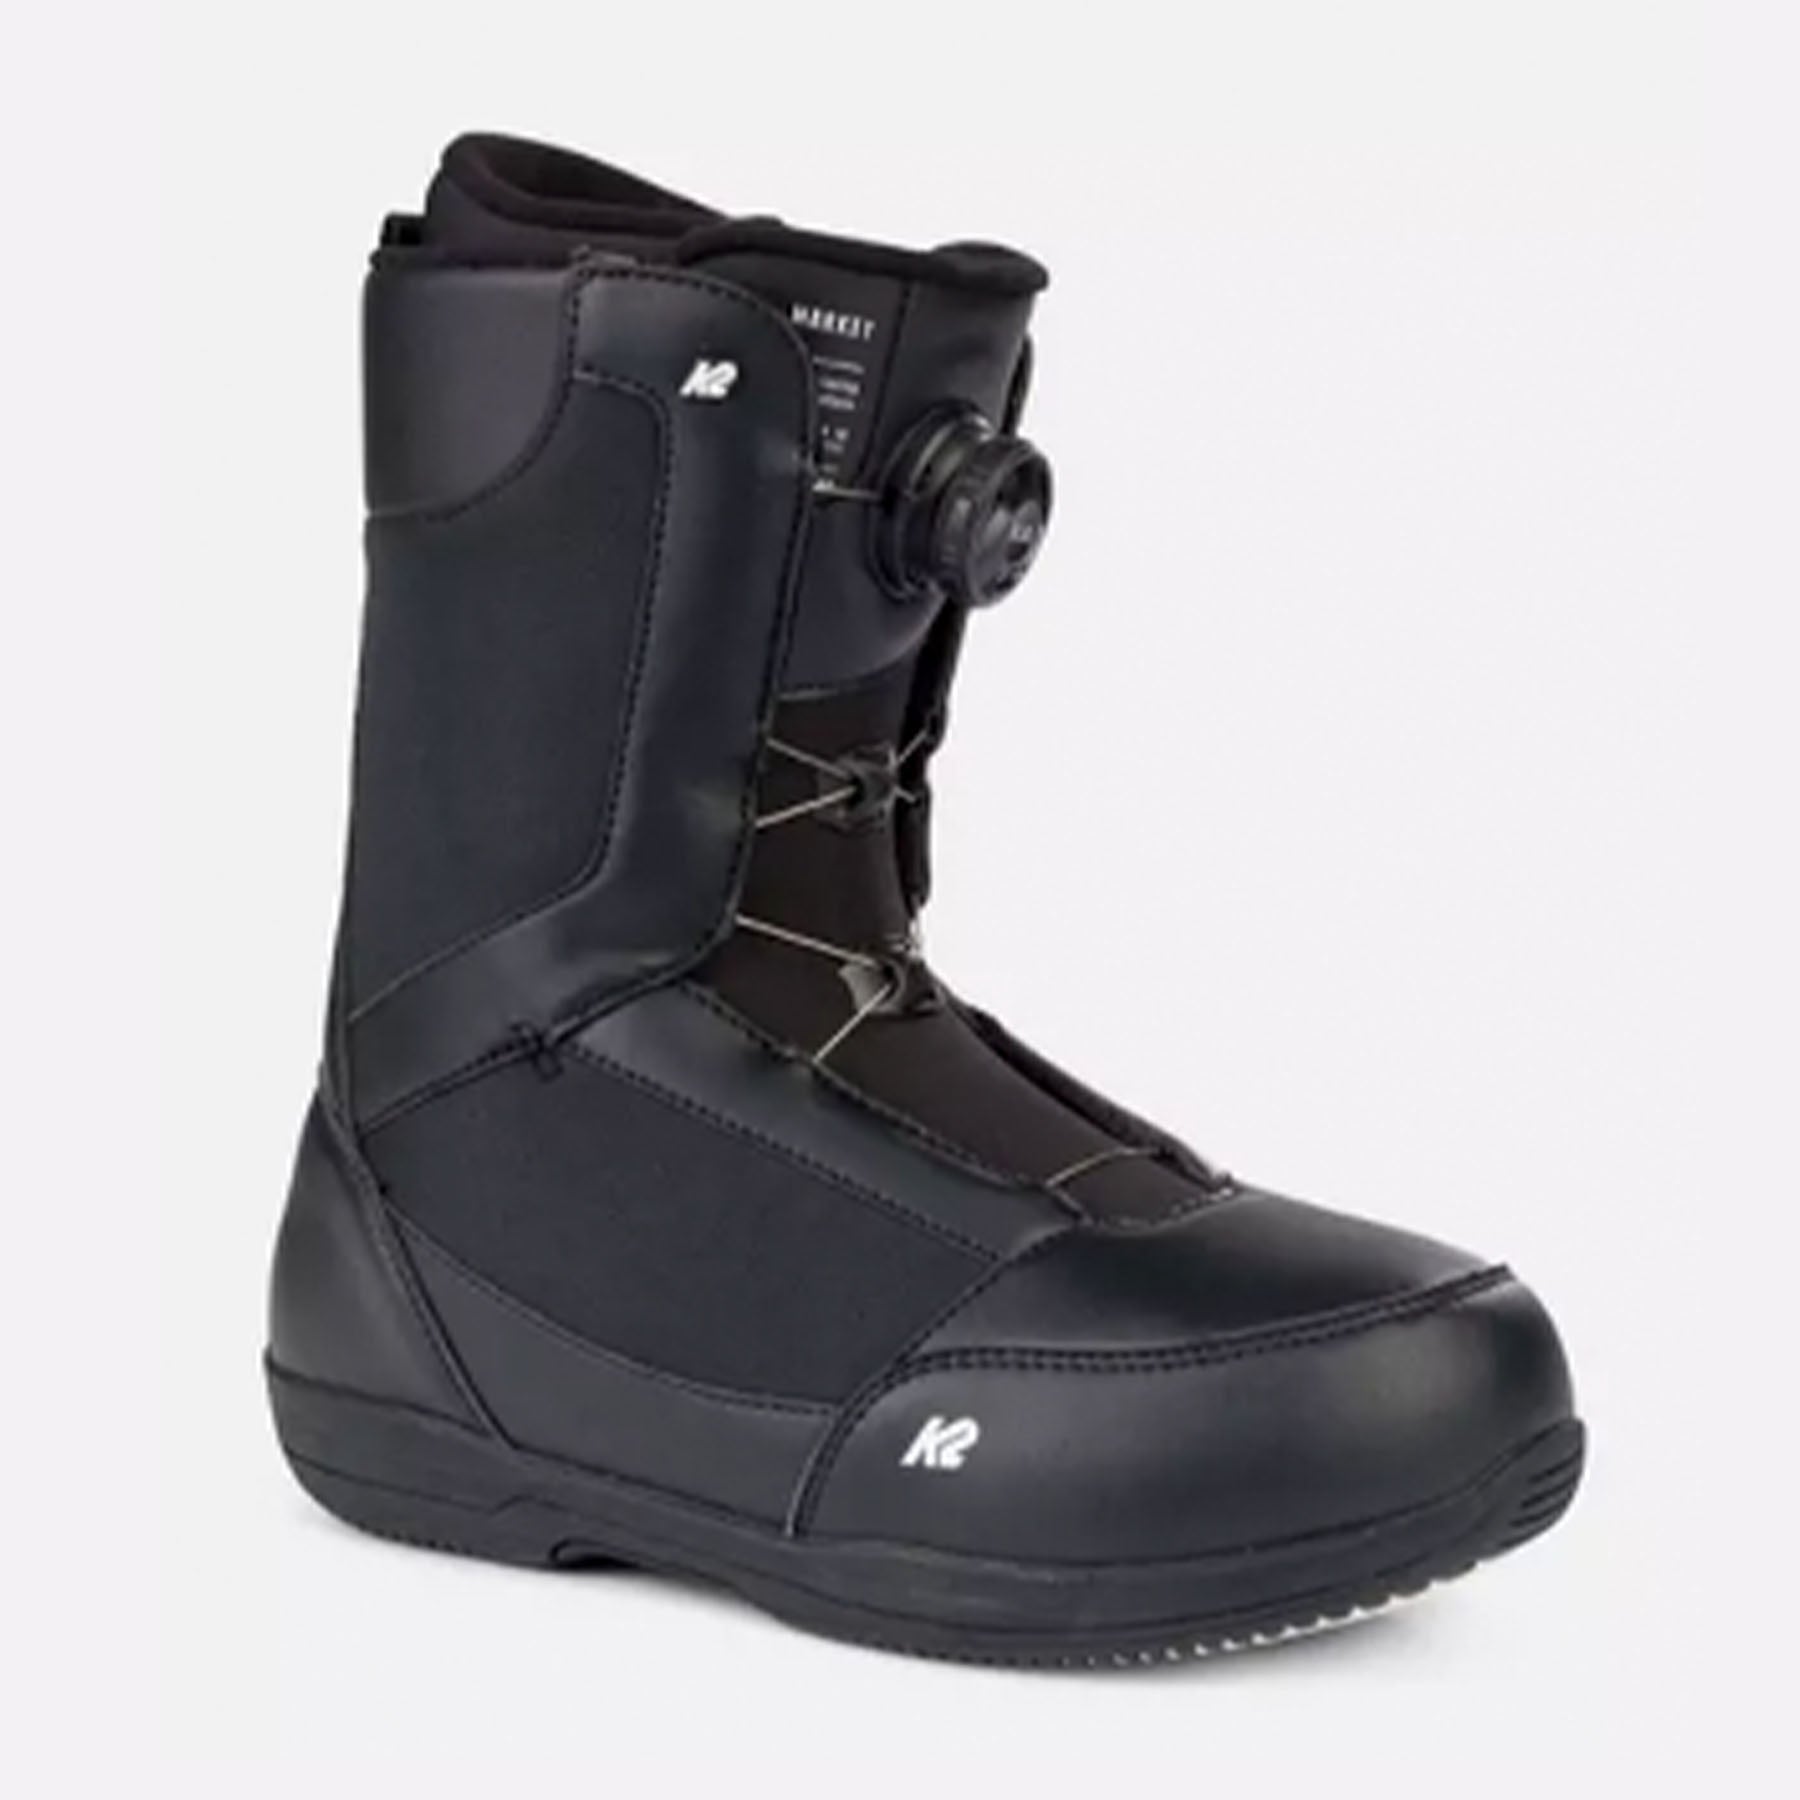 Hero image featuring a side angle view of the K2 Market Snowboard Boot in black